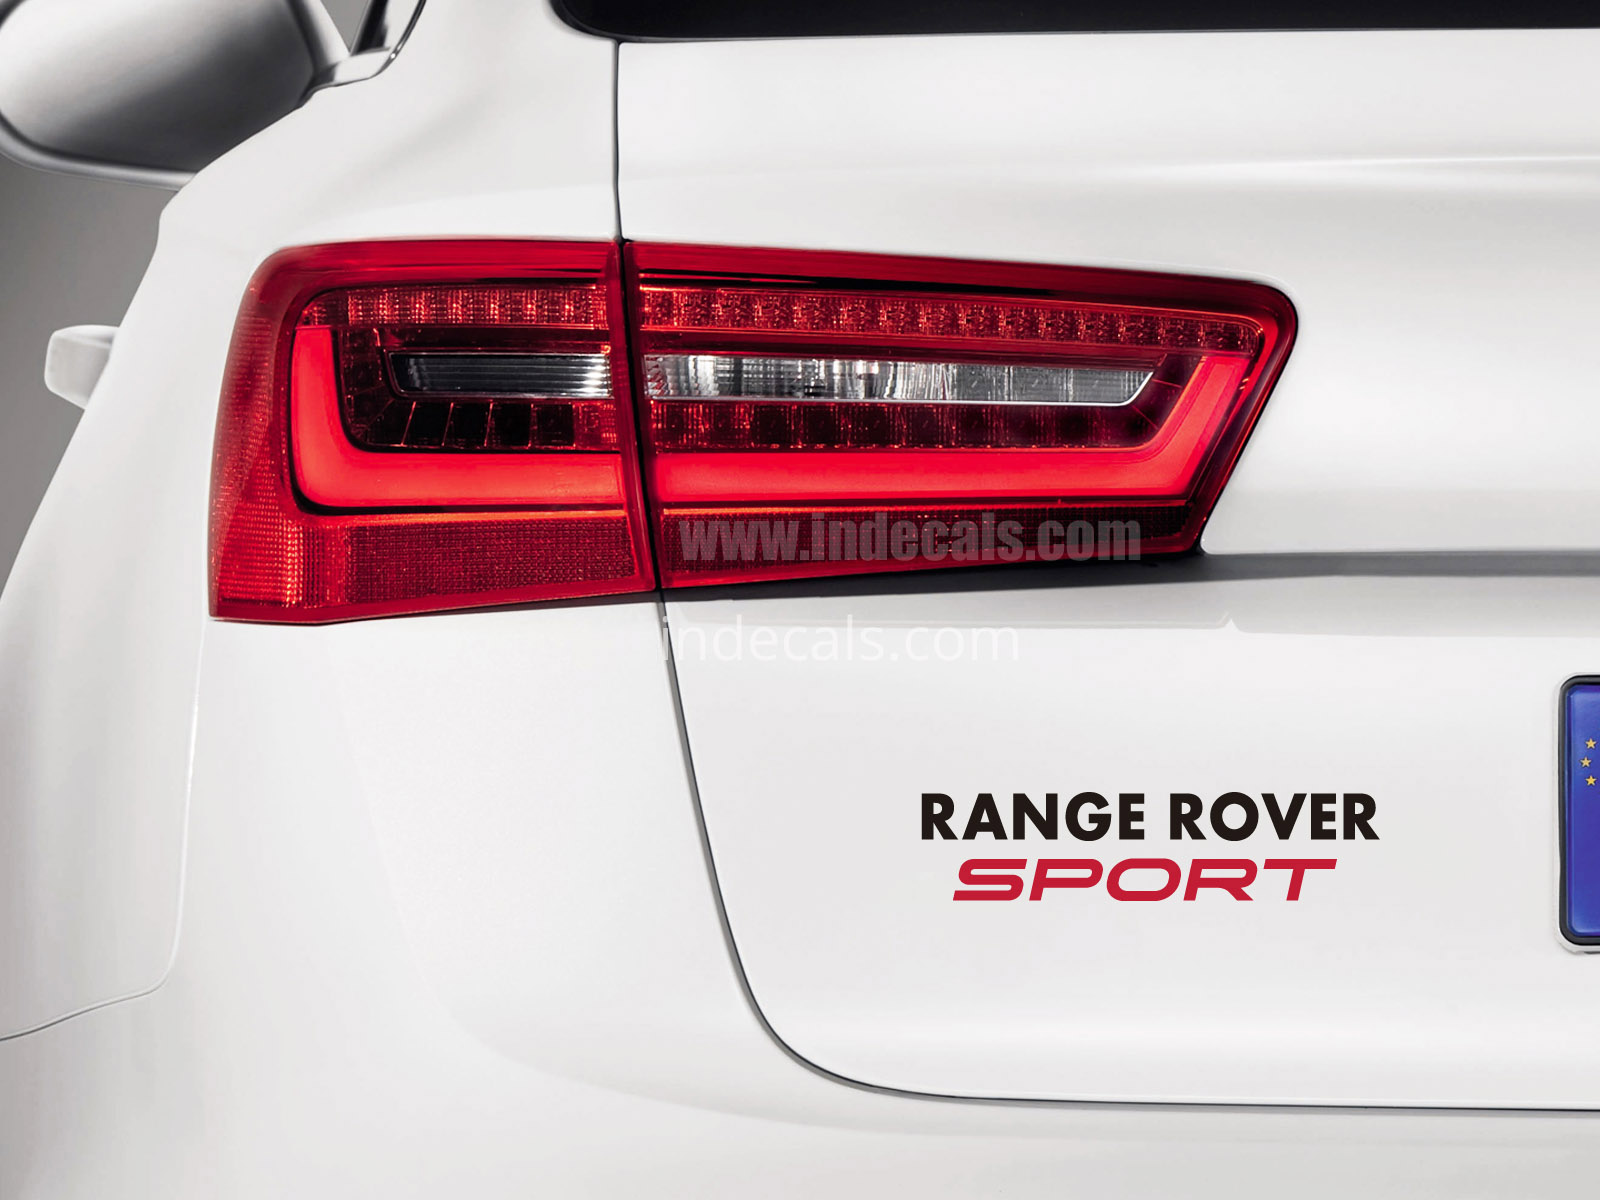 1 x Range Rover Sports Sticker for Trunk - Black & Red